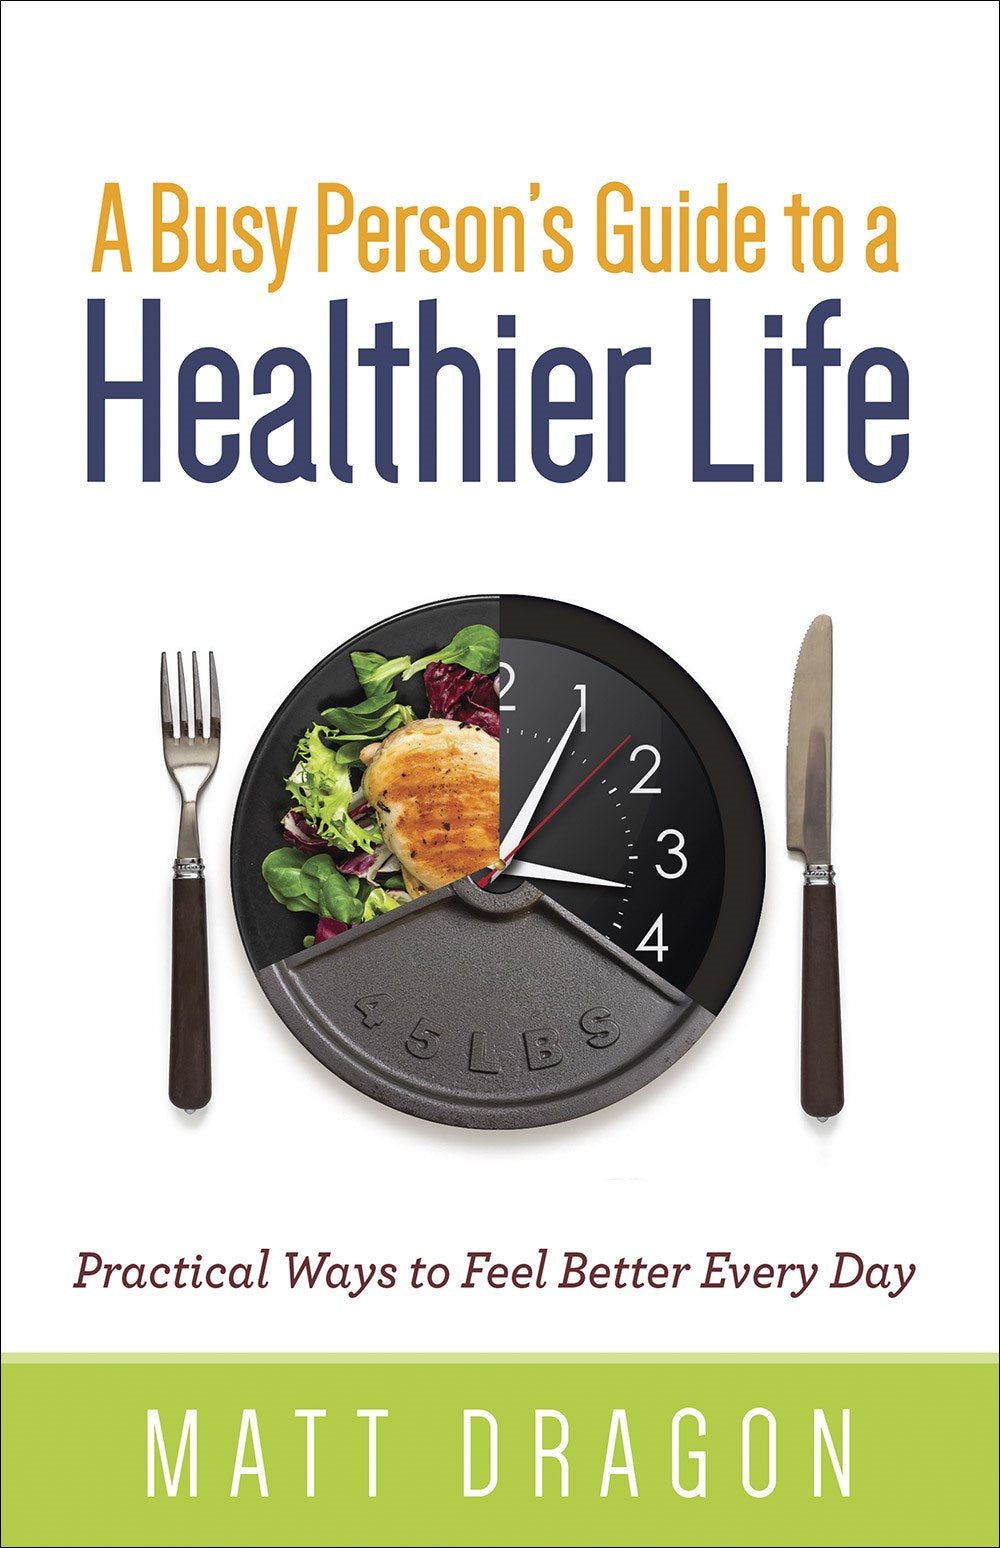 A Busy Person's Guide To A Healthier Life